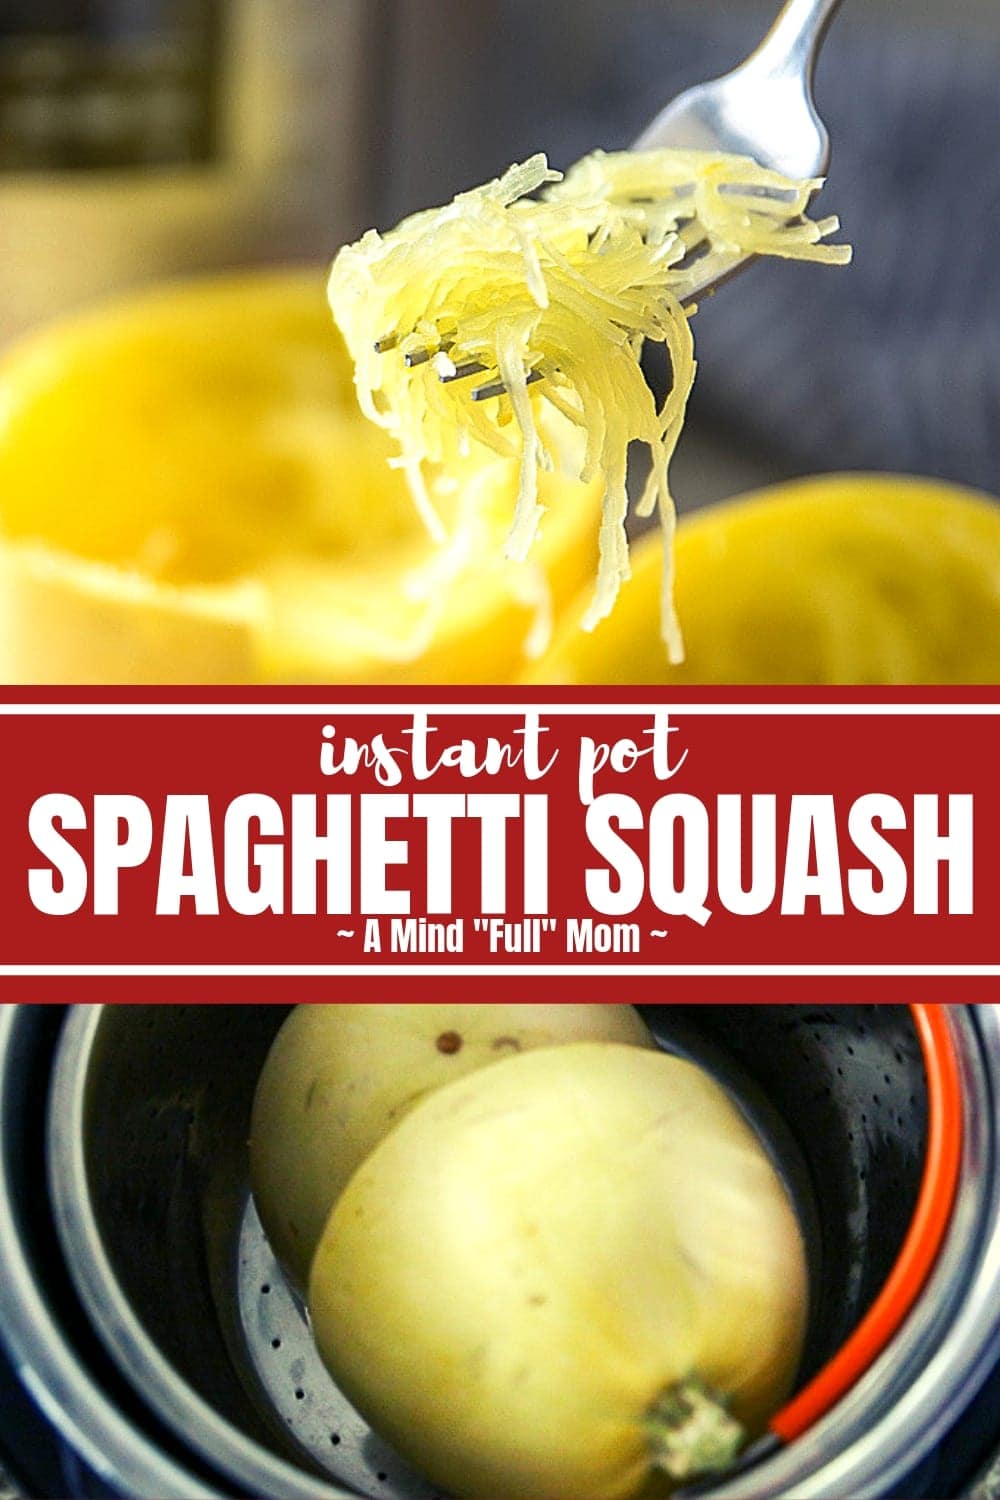 Instant Pot Spaghetti Squash is the easiest and BEST way to make Spaghetti Squash! Ready in less than 30 minutes, this method for pressure cooking spaghetti squash produces perfect results every time!